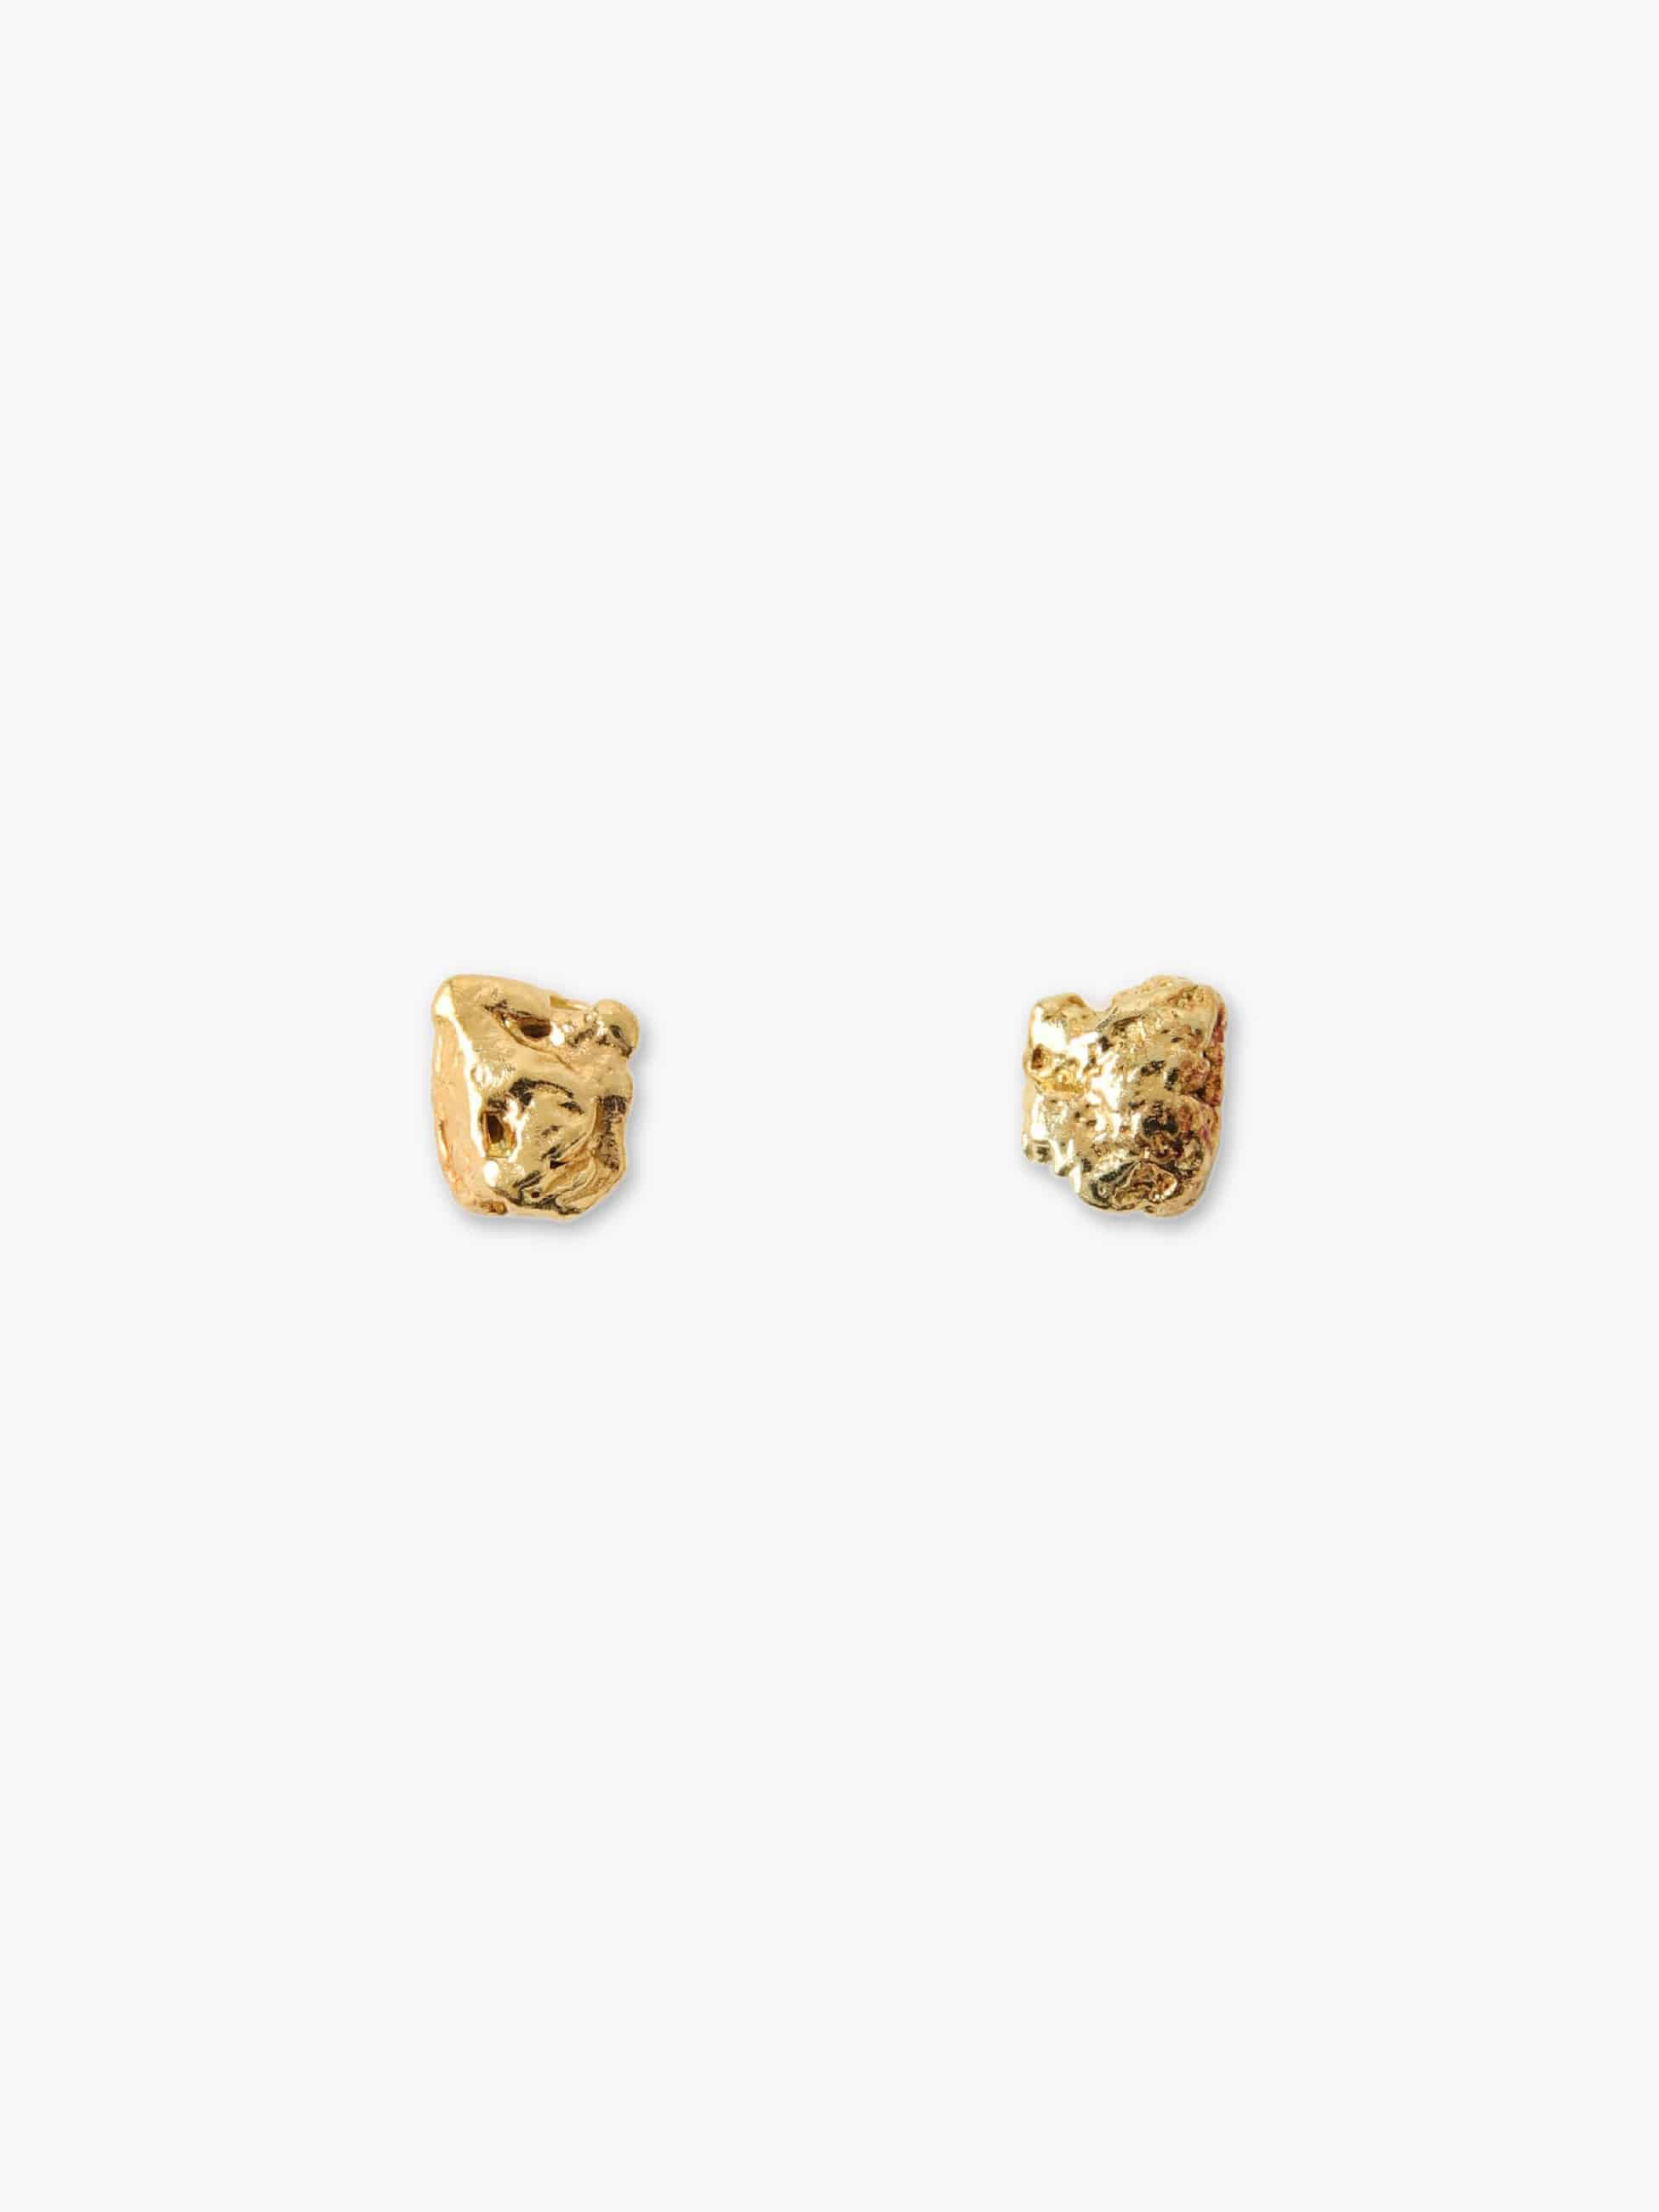 Gold Nugget Pierced Earrings（Large） 詳細画像 yellow gold 1